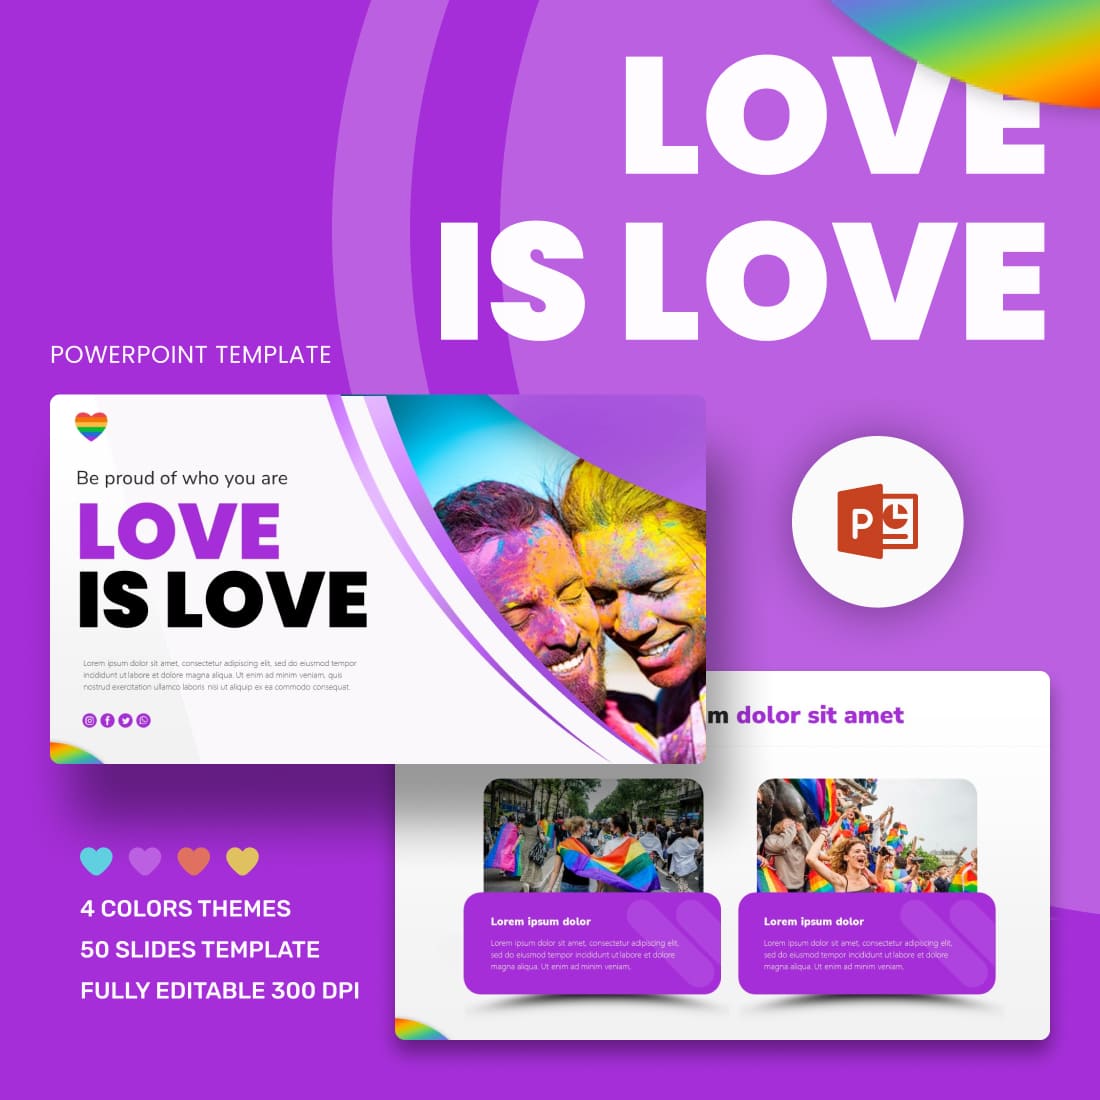 Love is Love LGBT PowerPoint Template.